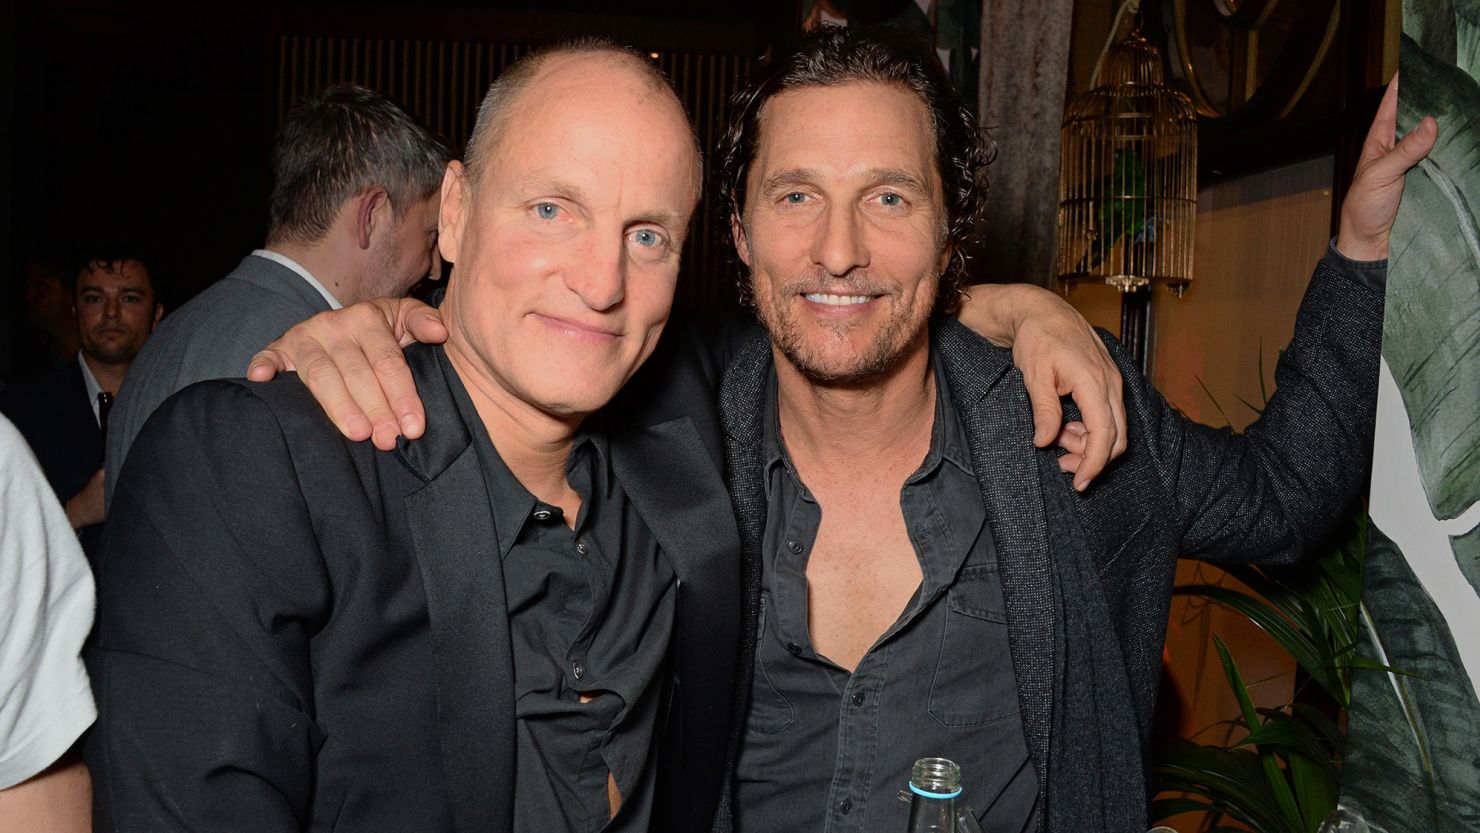 Woody Harrelson and Matthew McConaughey have been friends for decades.